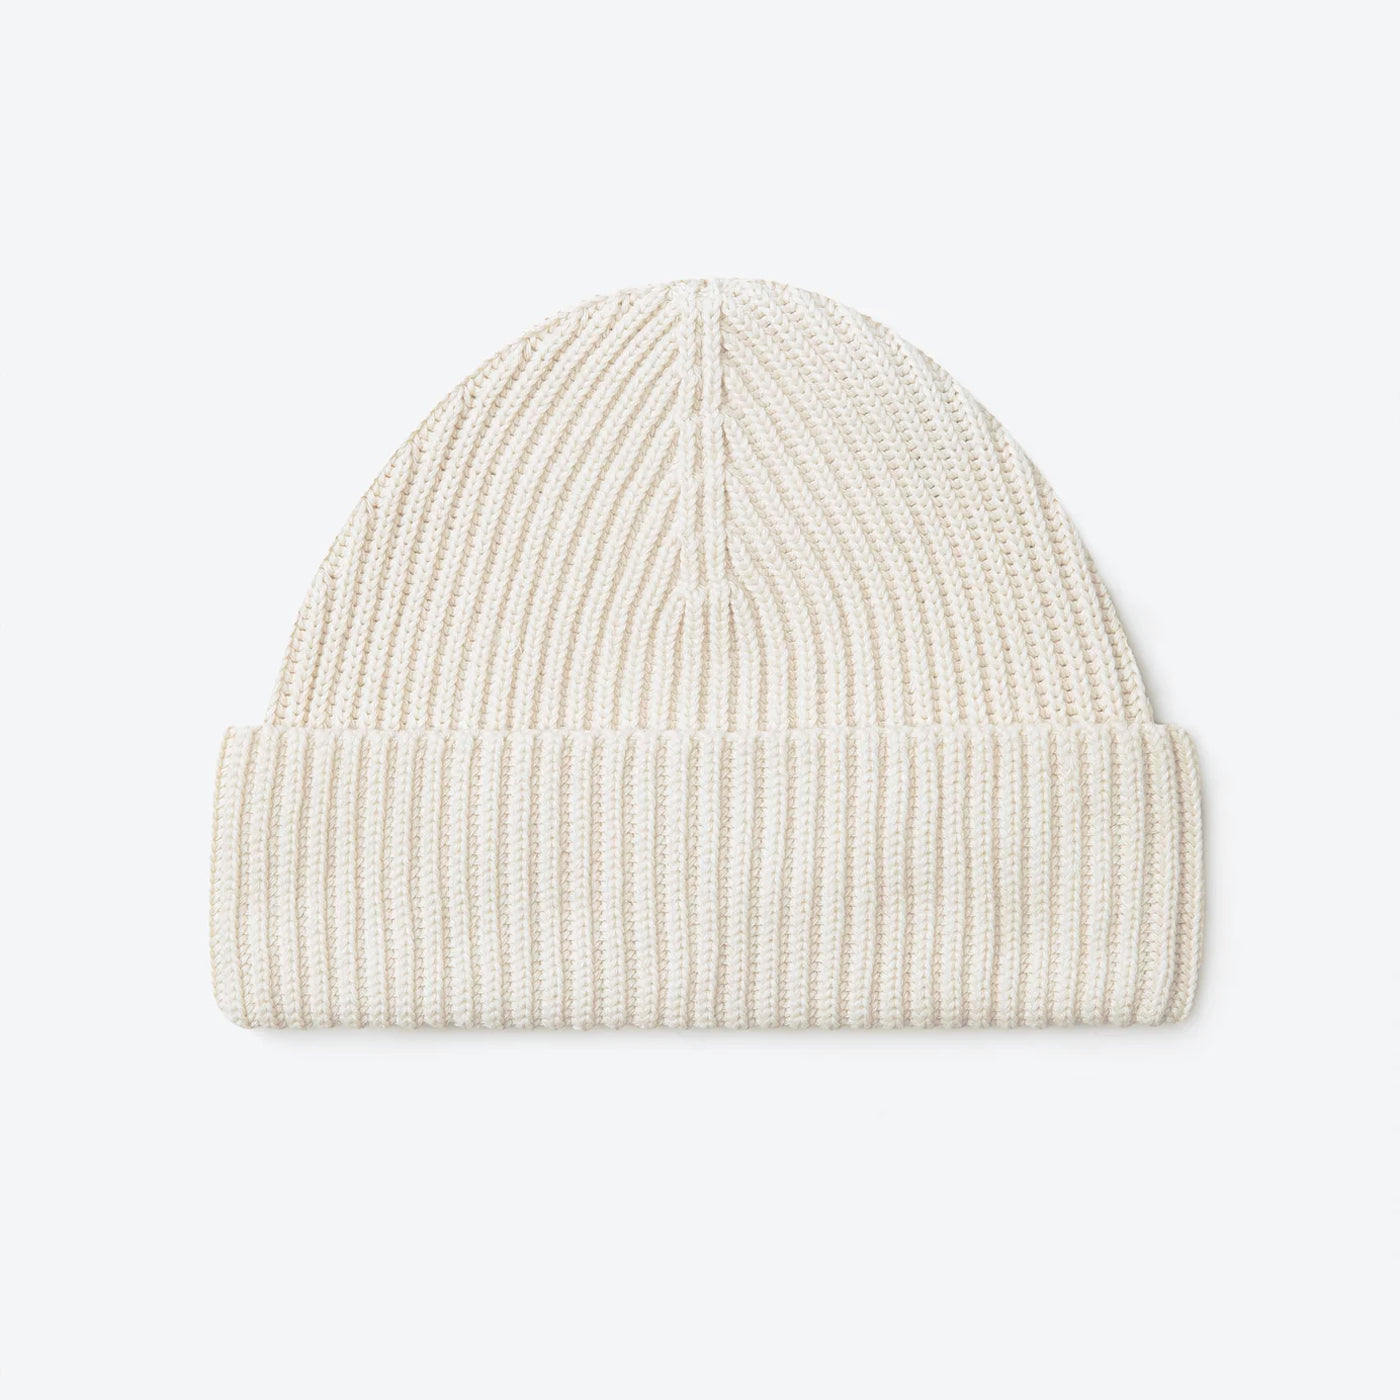 Mr Simple - Relic Beanie - Natural